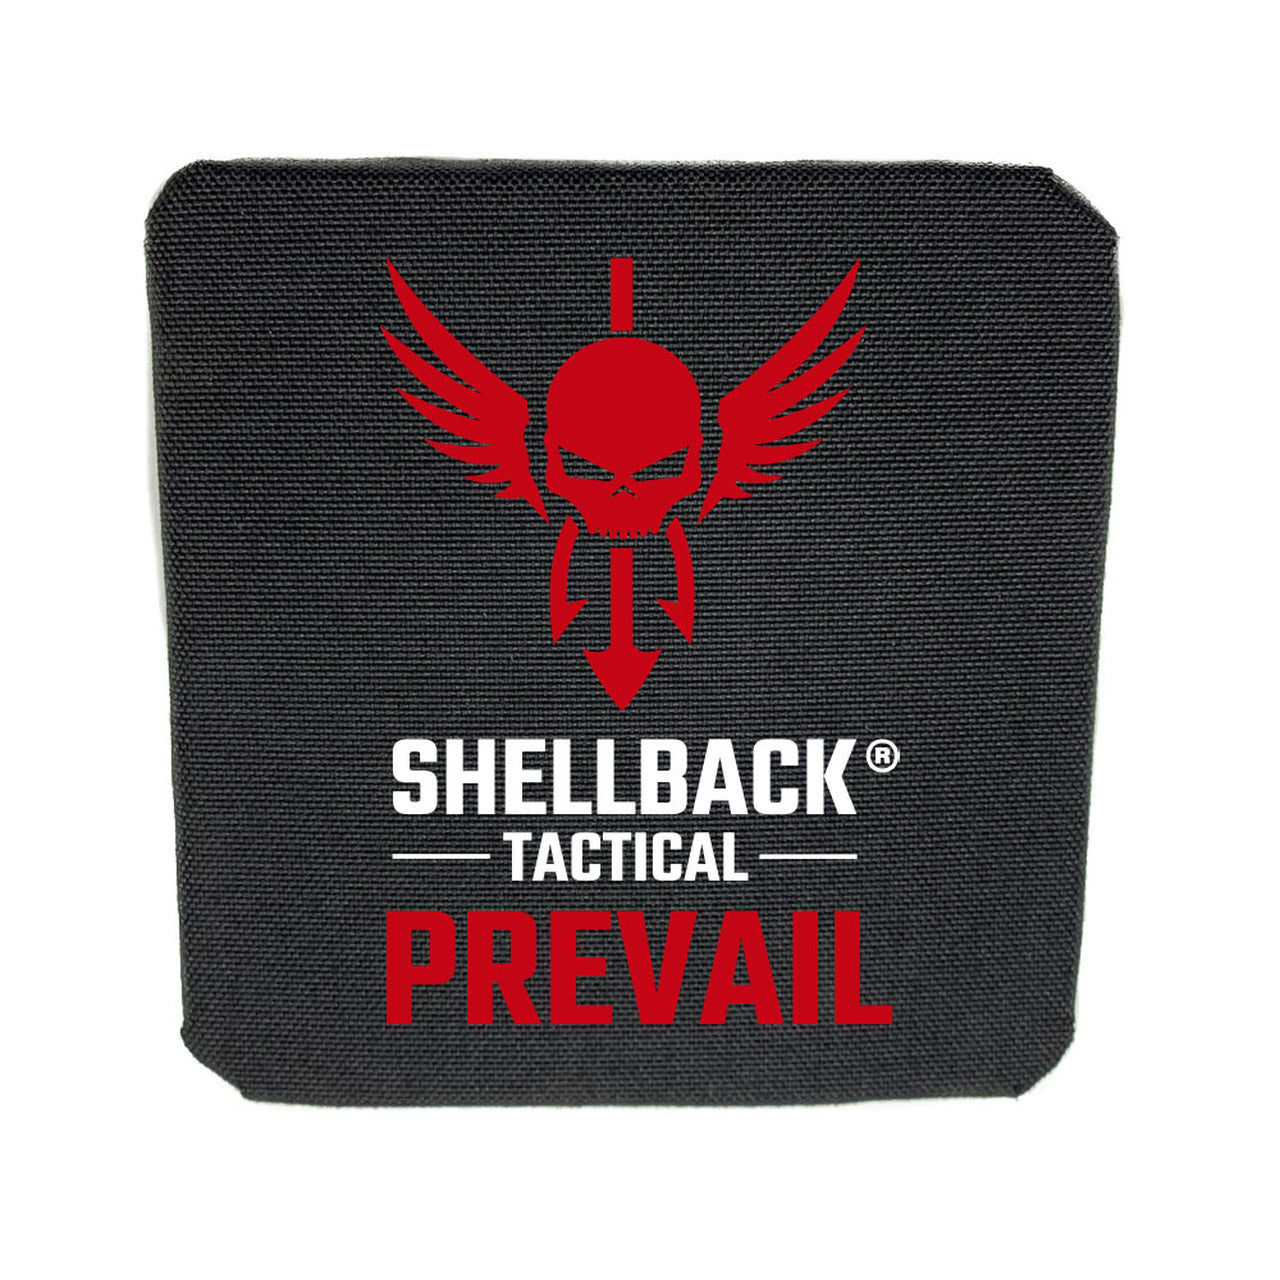 Shellback Tactical introduces their latest innovation, the Shellback Tactical Prevail Series Level IV Single Curve 6 x 6 Hard Armor Plate. This cutting-edge product combines the renowned expertise of Shellback Tactical with level IV protection and includes side plates for maximum safety.